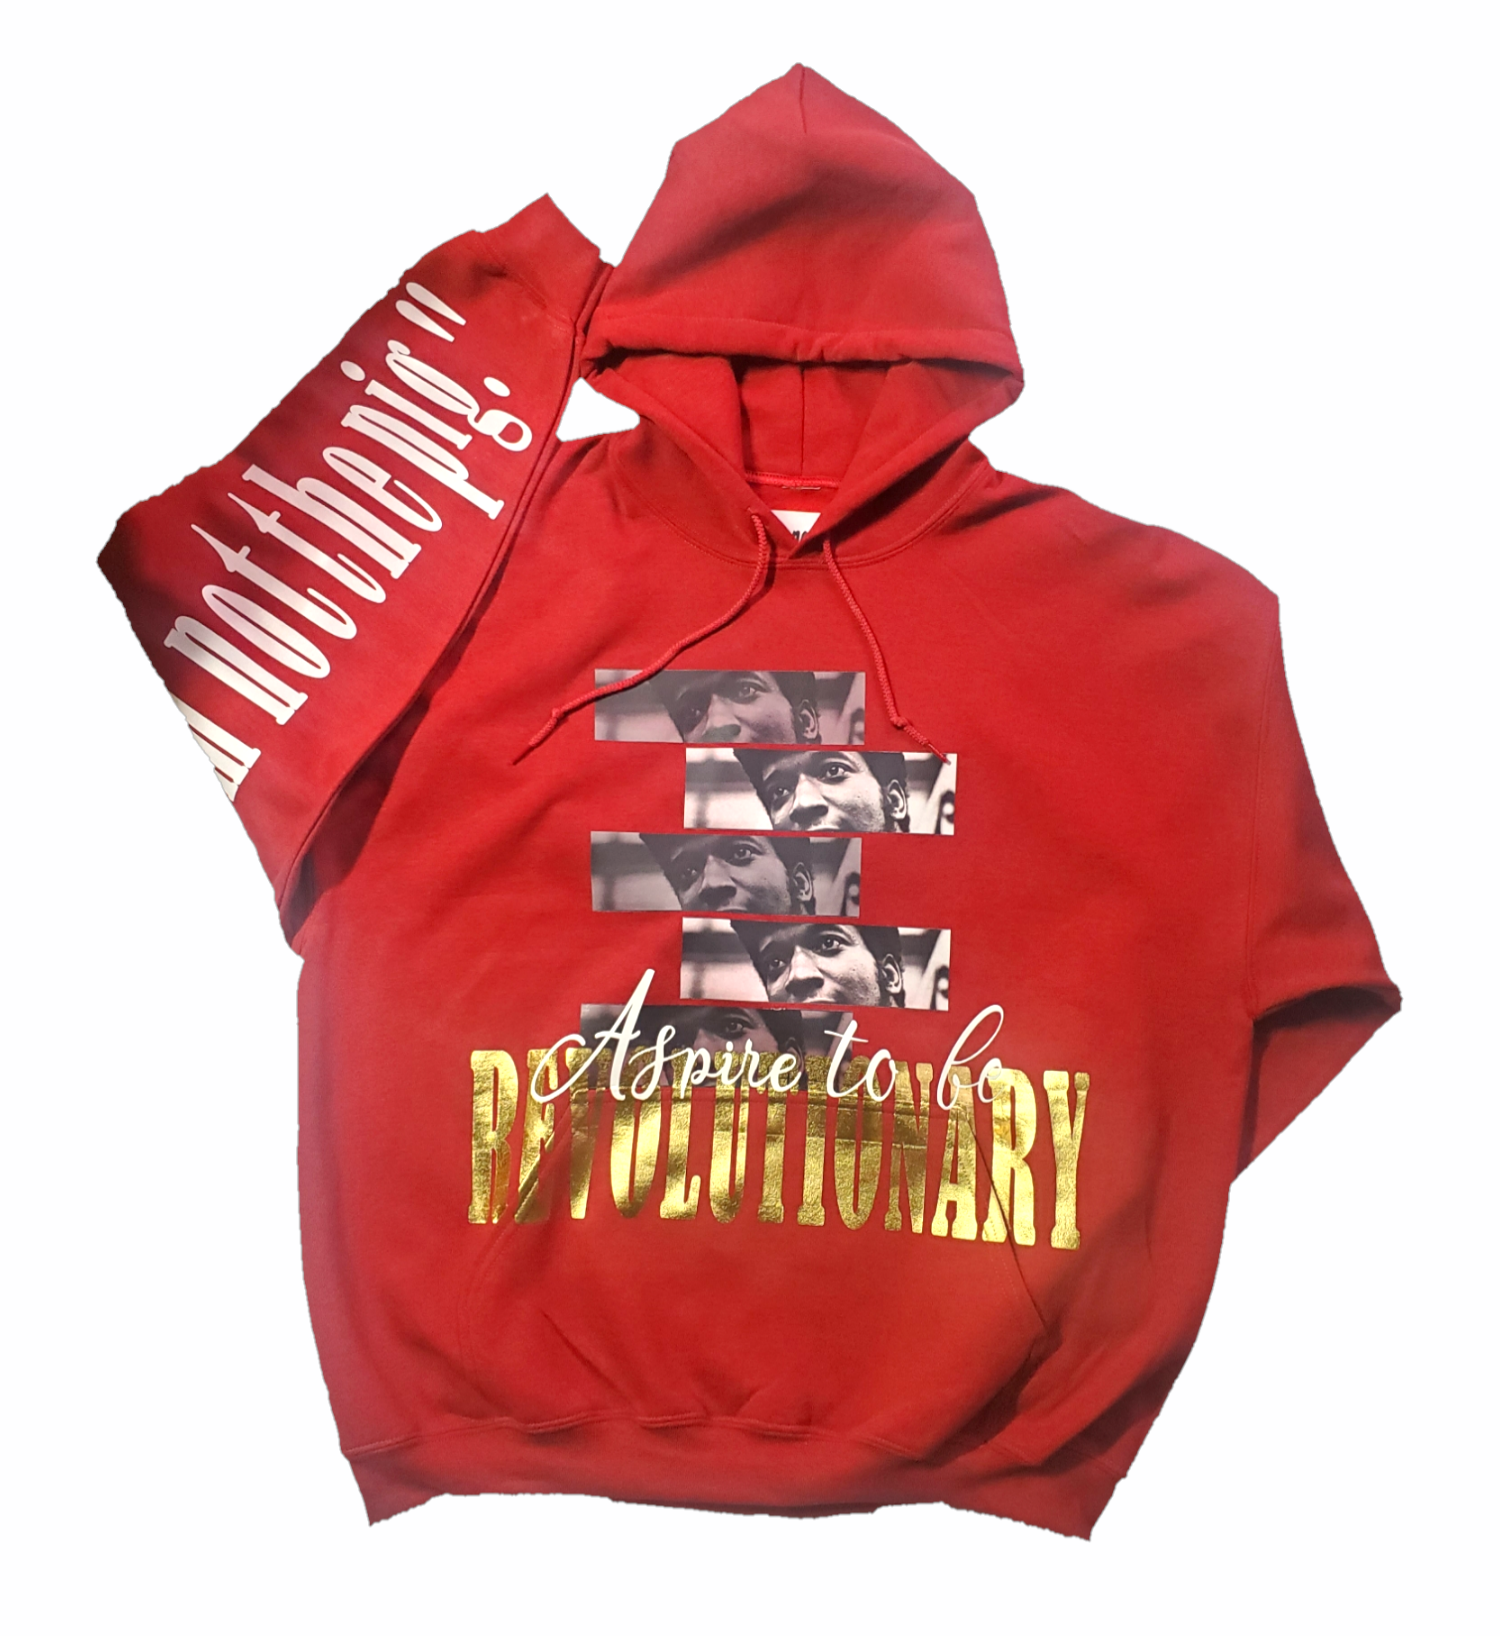 "I am the people I am not the pig." Fred Hampton Hoodie